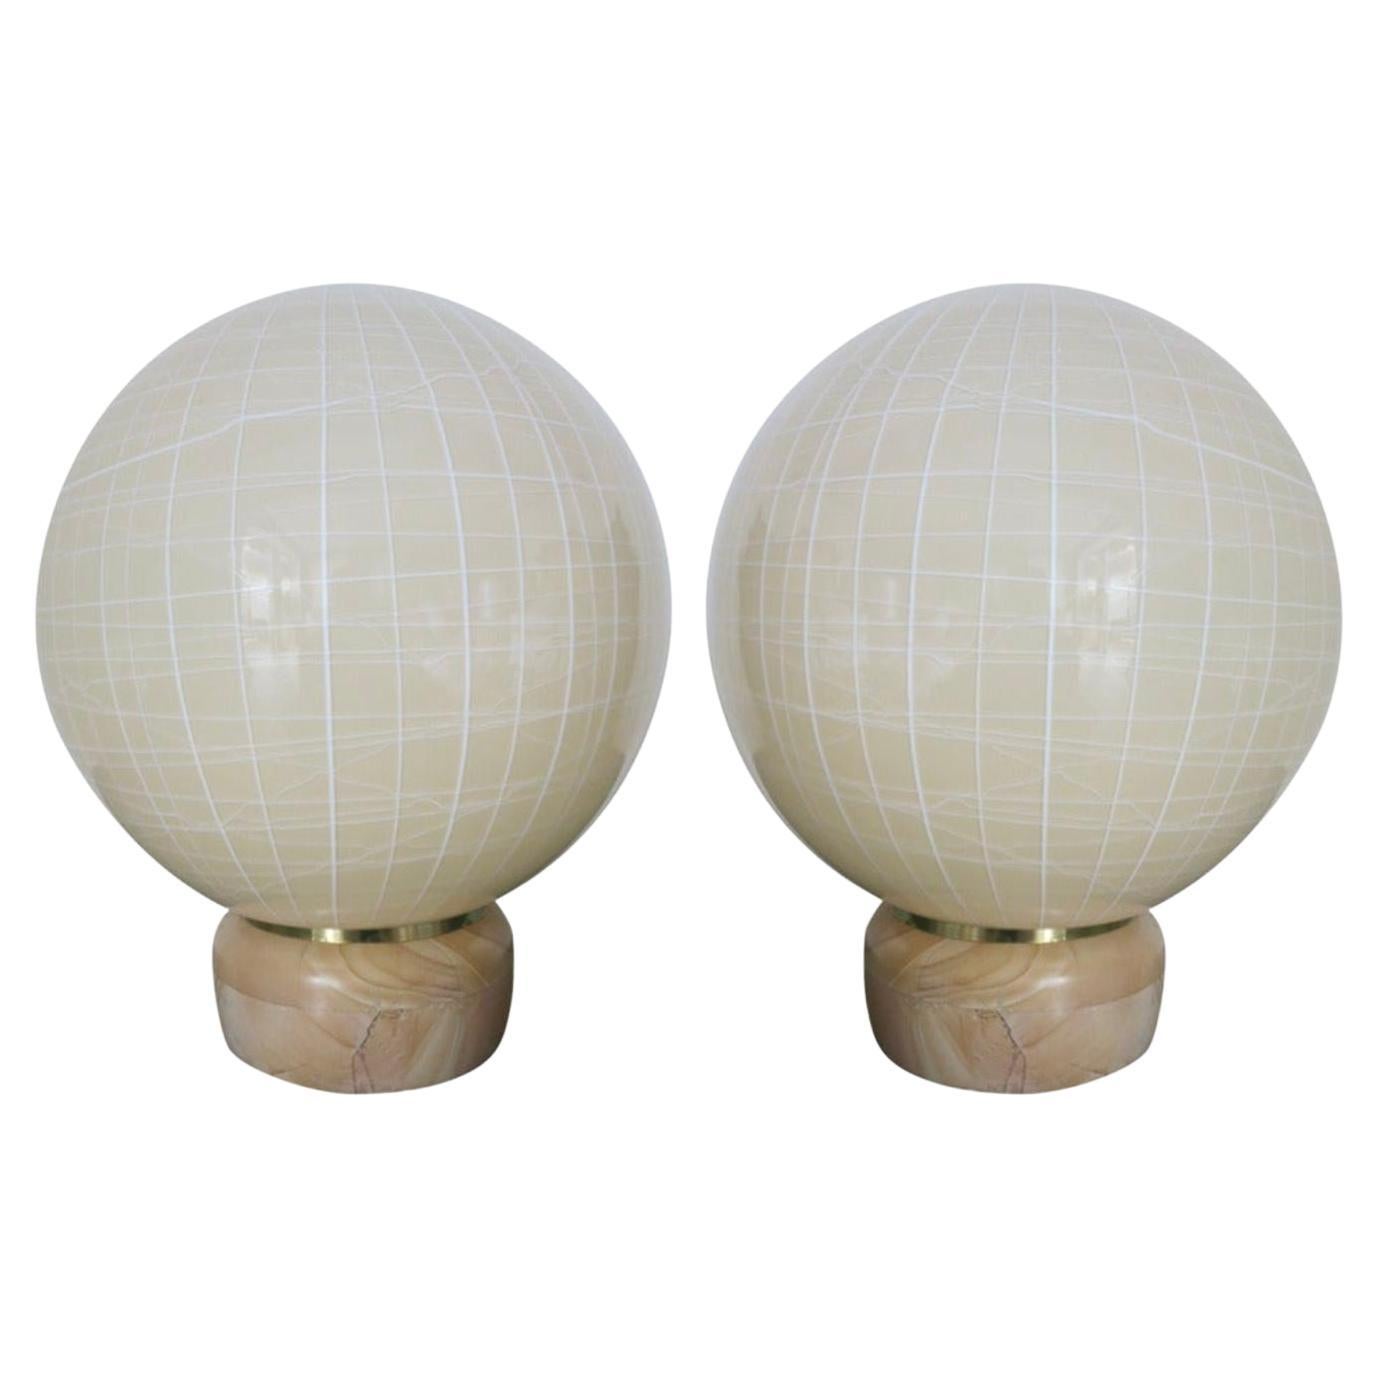 Vintage Pair of Table Lamps w/ Beige Murano Glass Designed by Venini, 1960s For Sale